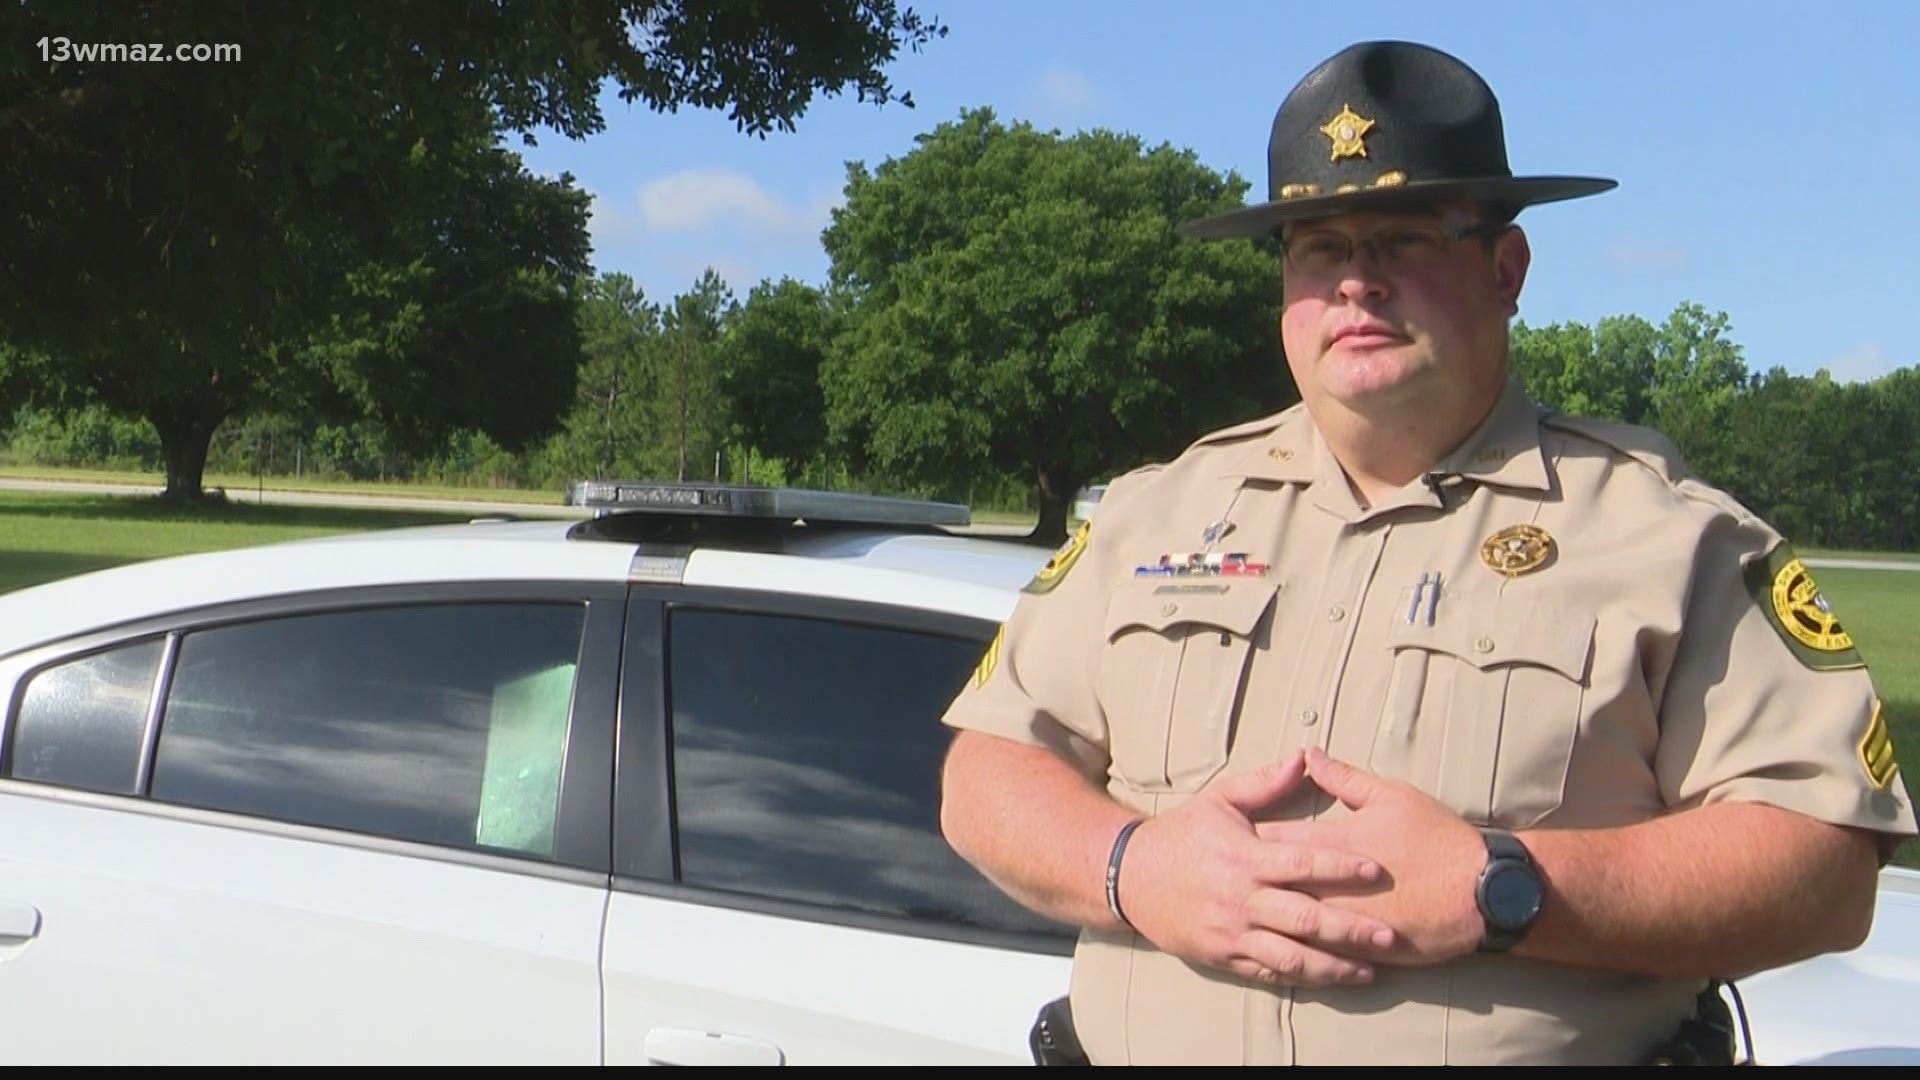 More than 15,000 lives are saved each year in the United States because drivers who got into car accidents buckled up. A Crisp County corporal is one of them.